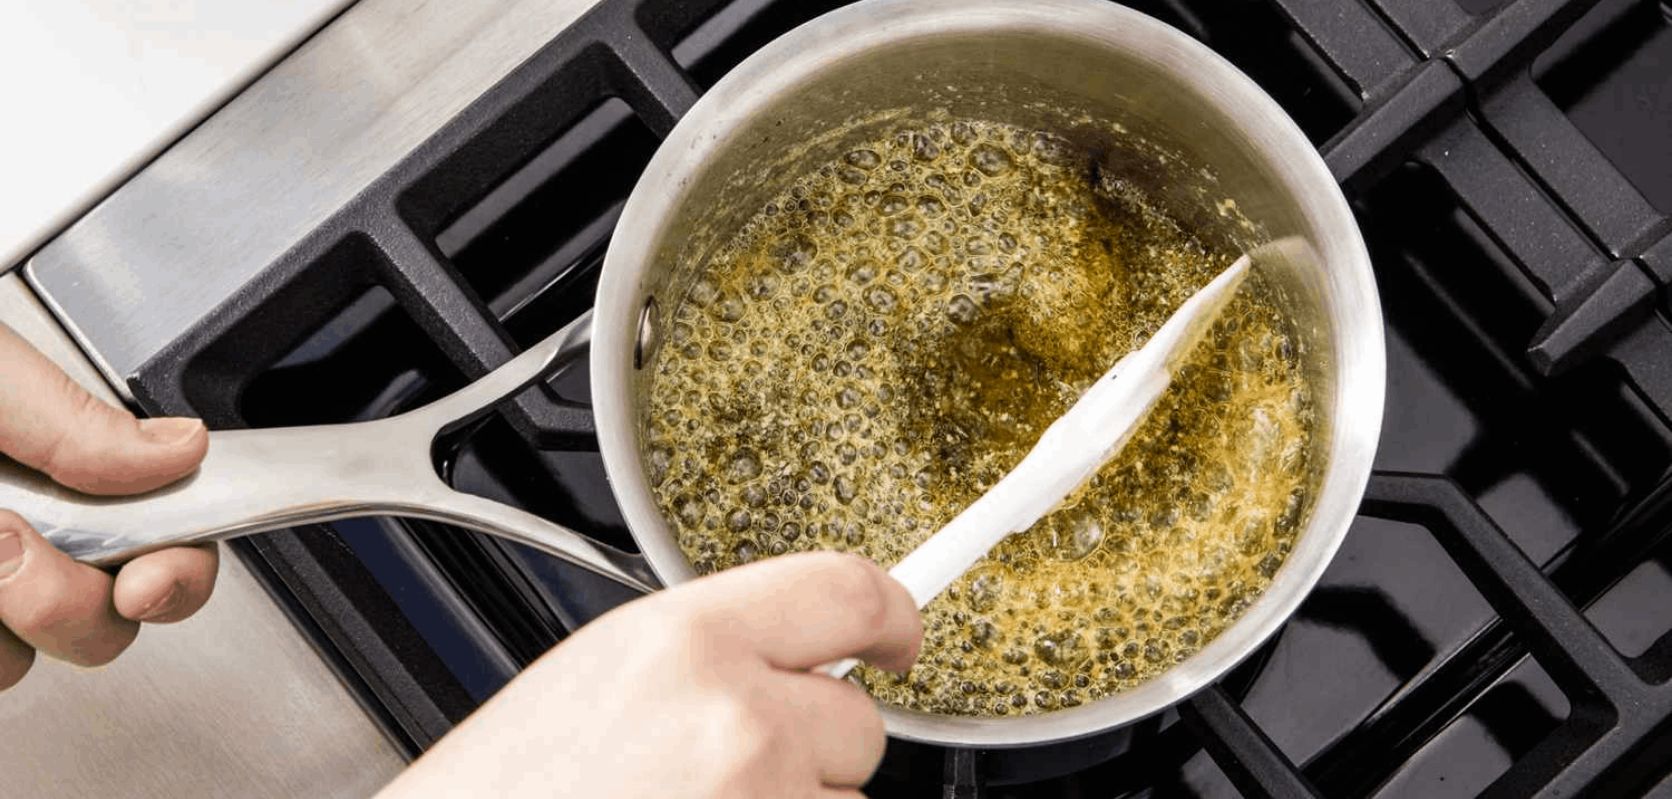 Cannabutter is the starting point of this recipe. As much as the name is interesting, the process is easy too.